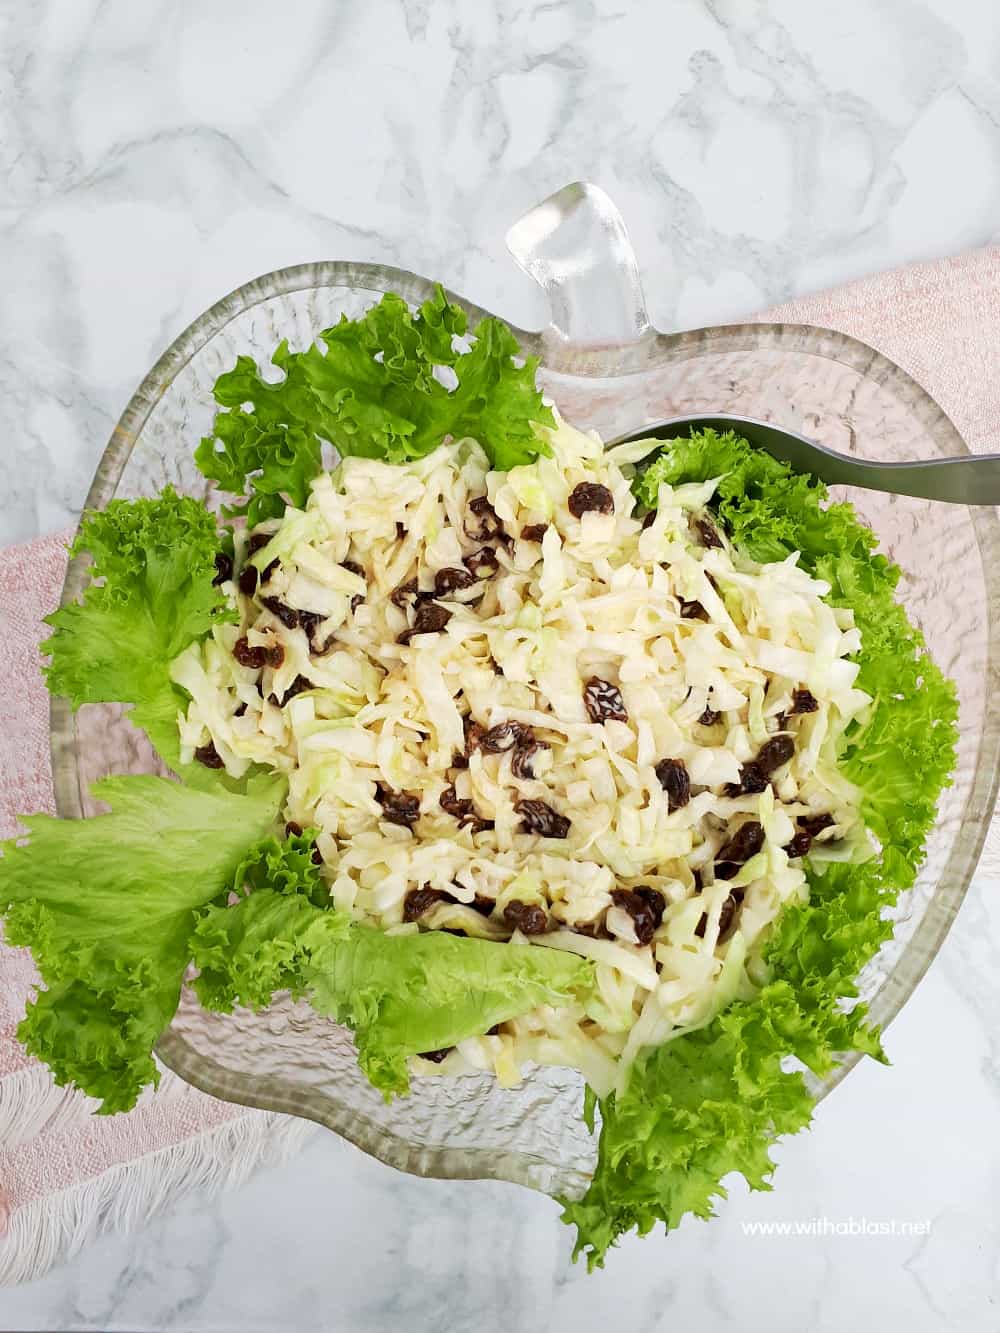 Simple, yet delicious, Cabbage and Onion Salad with raisins is the ideal addition to most main meals and especially good served with barbecued meat